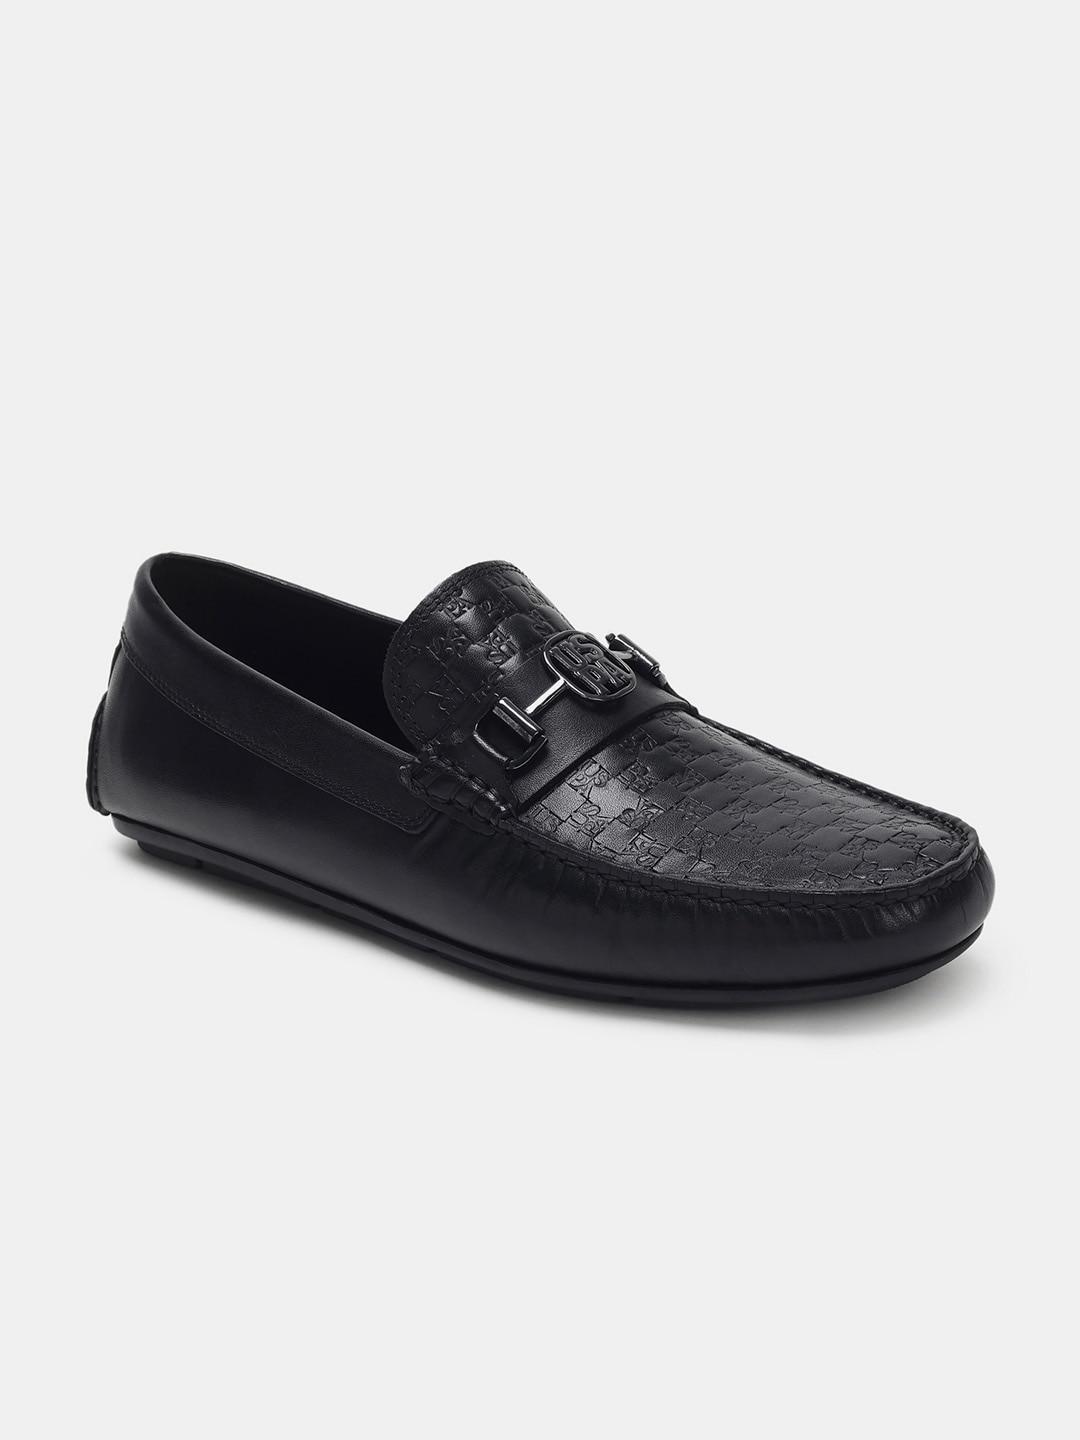 U S Polo Assn Men Textured Leather Loafers